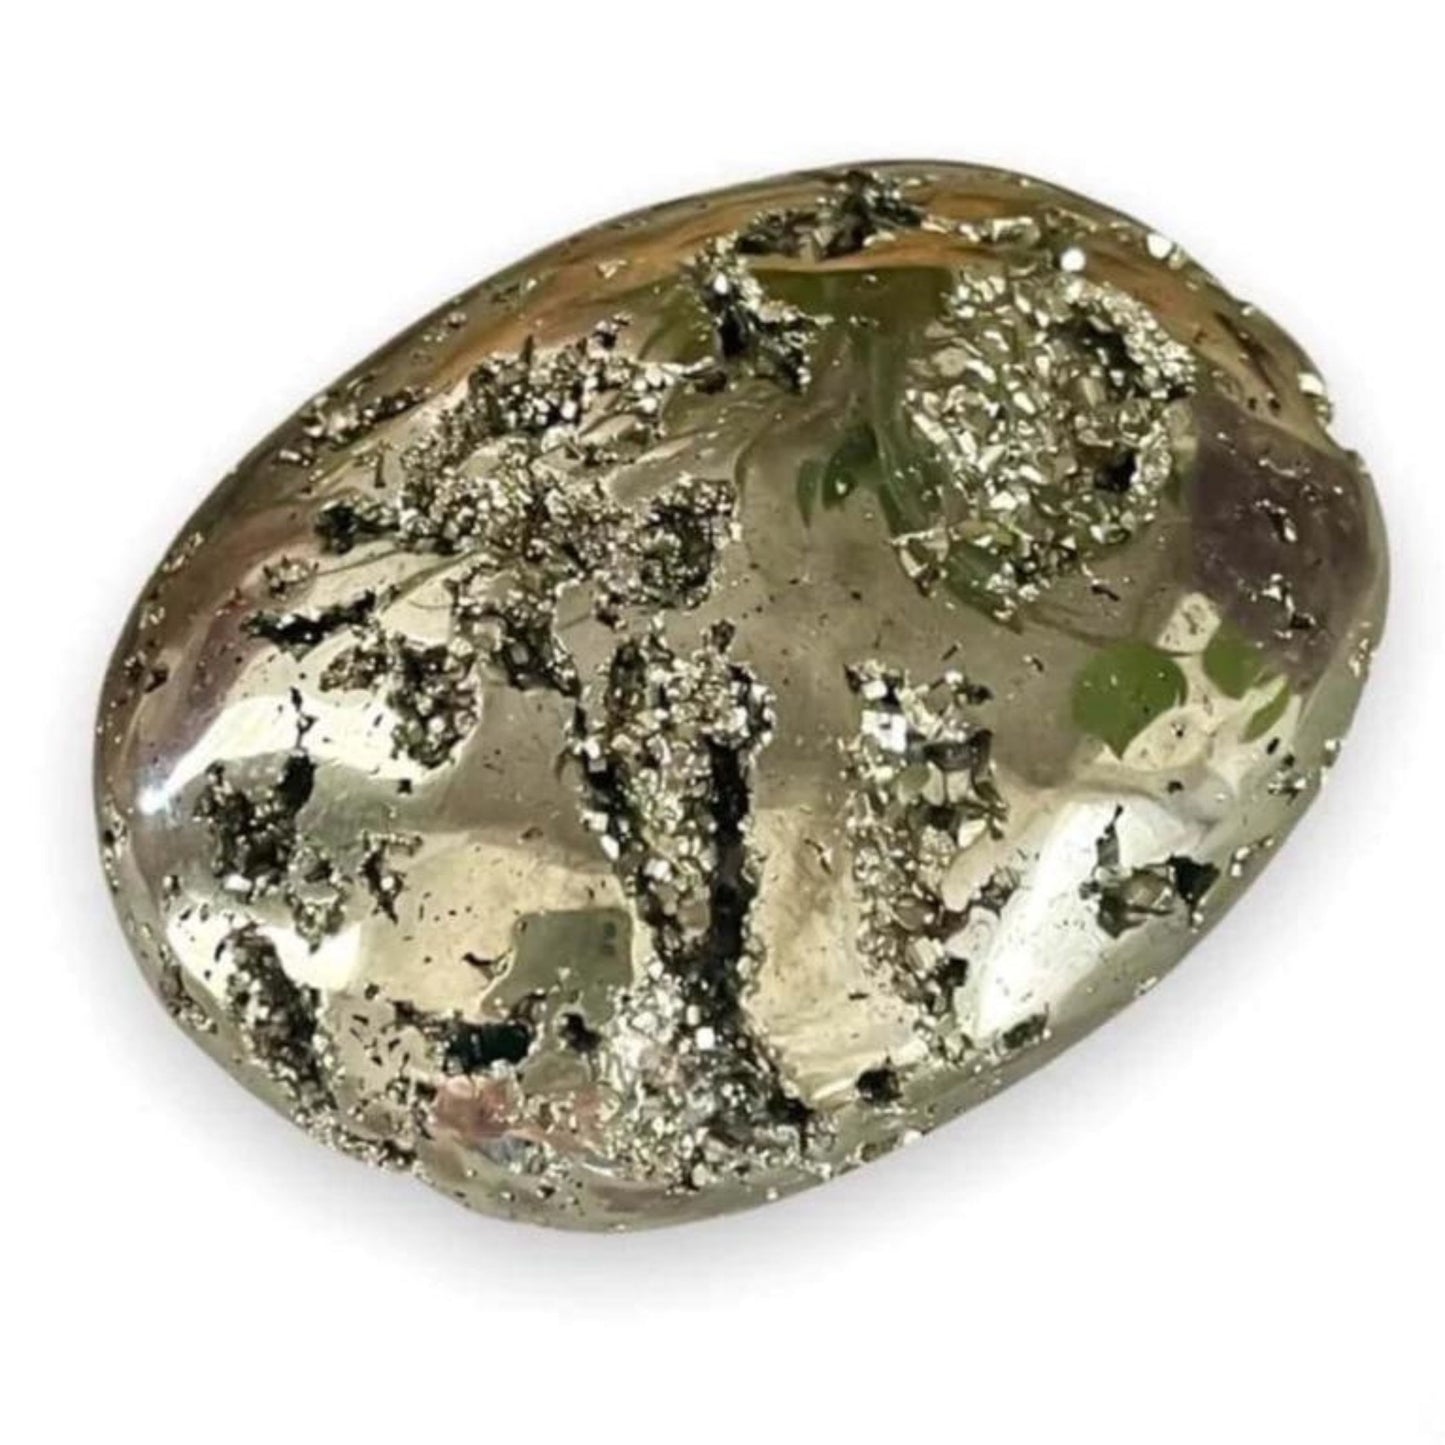 PYRITE PALM STONE FOR ATTRACTING MONEY